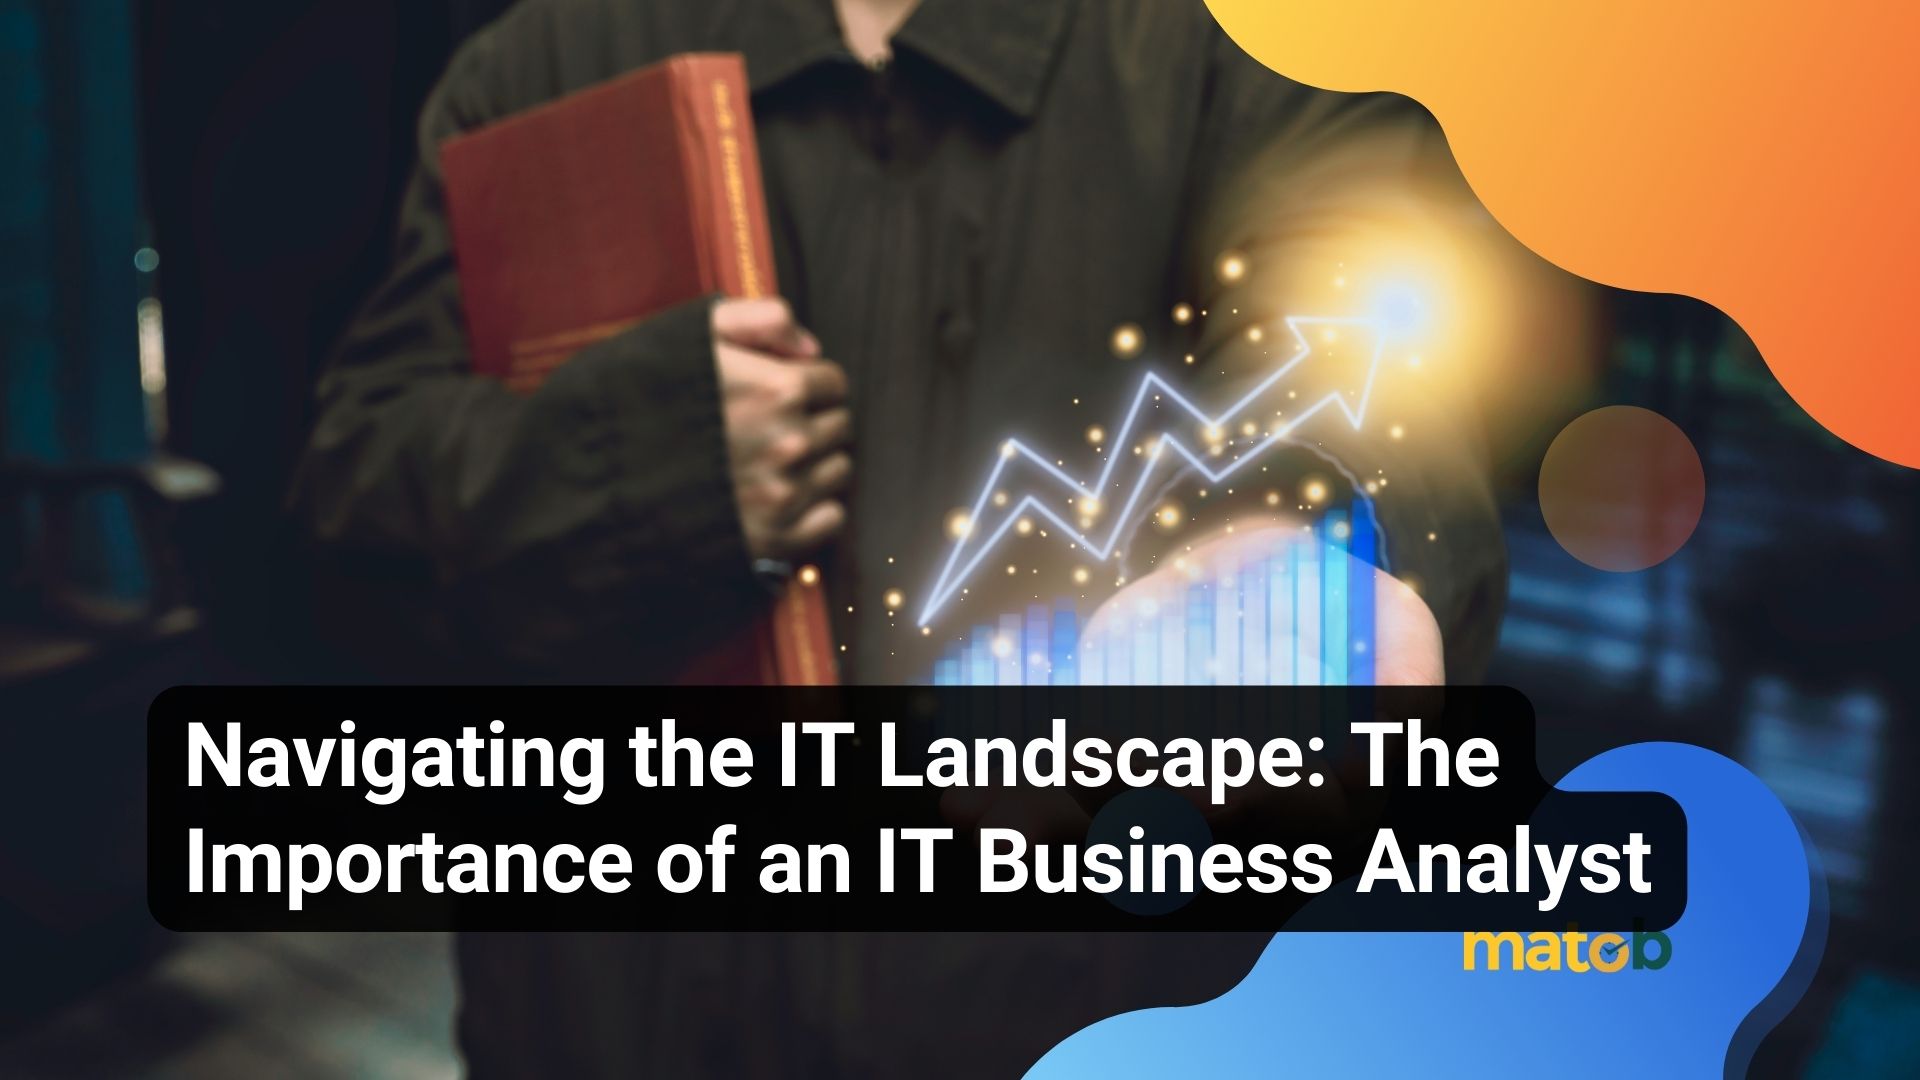 Navigating the IT Landscape: The Importance of an IT Business Analyst